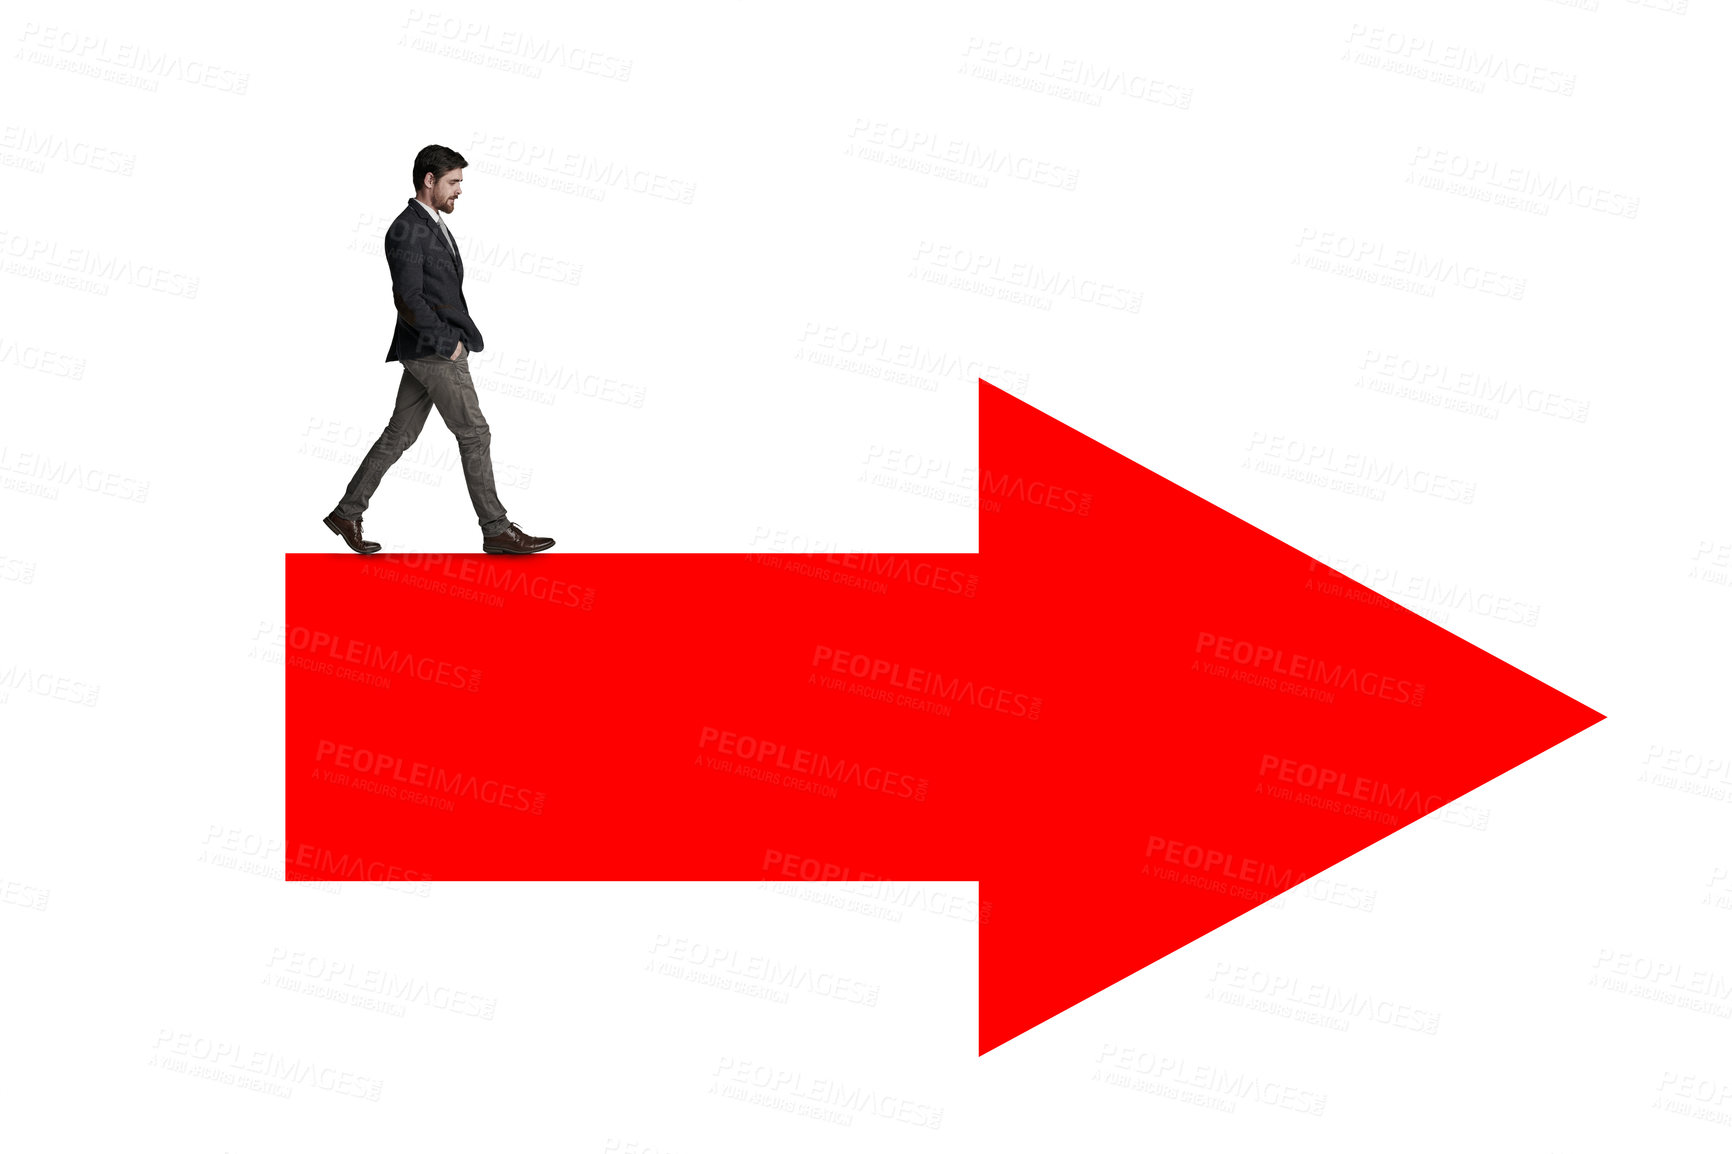 Buy stock photo Shot of a businessman waking across a red arrow against a white background